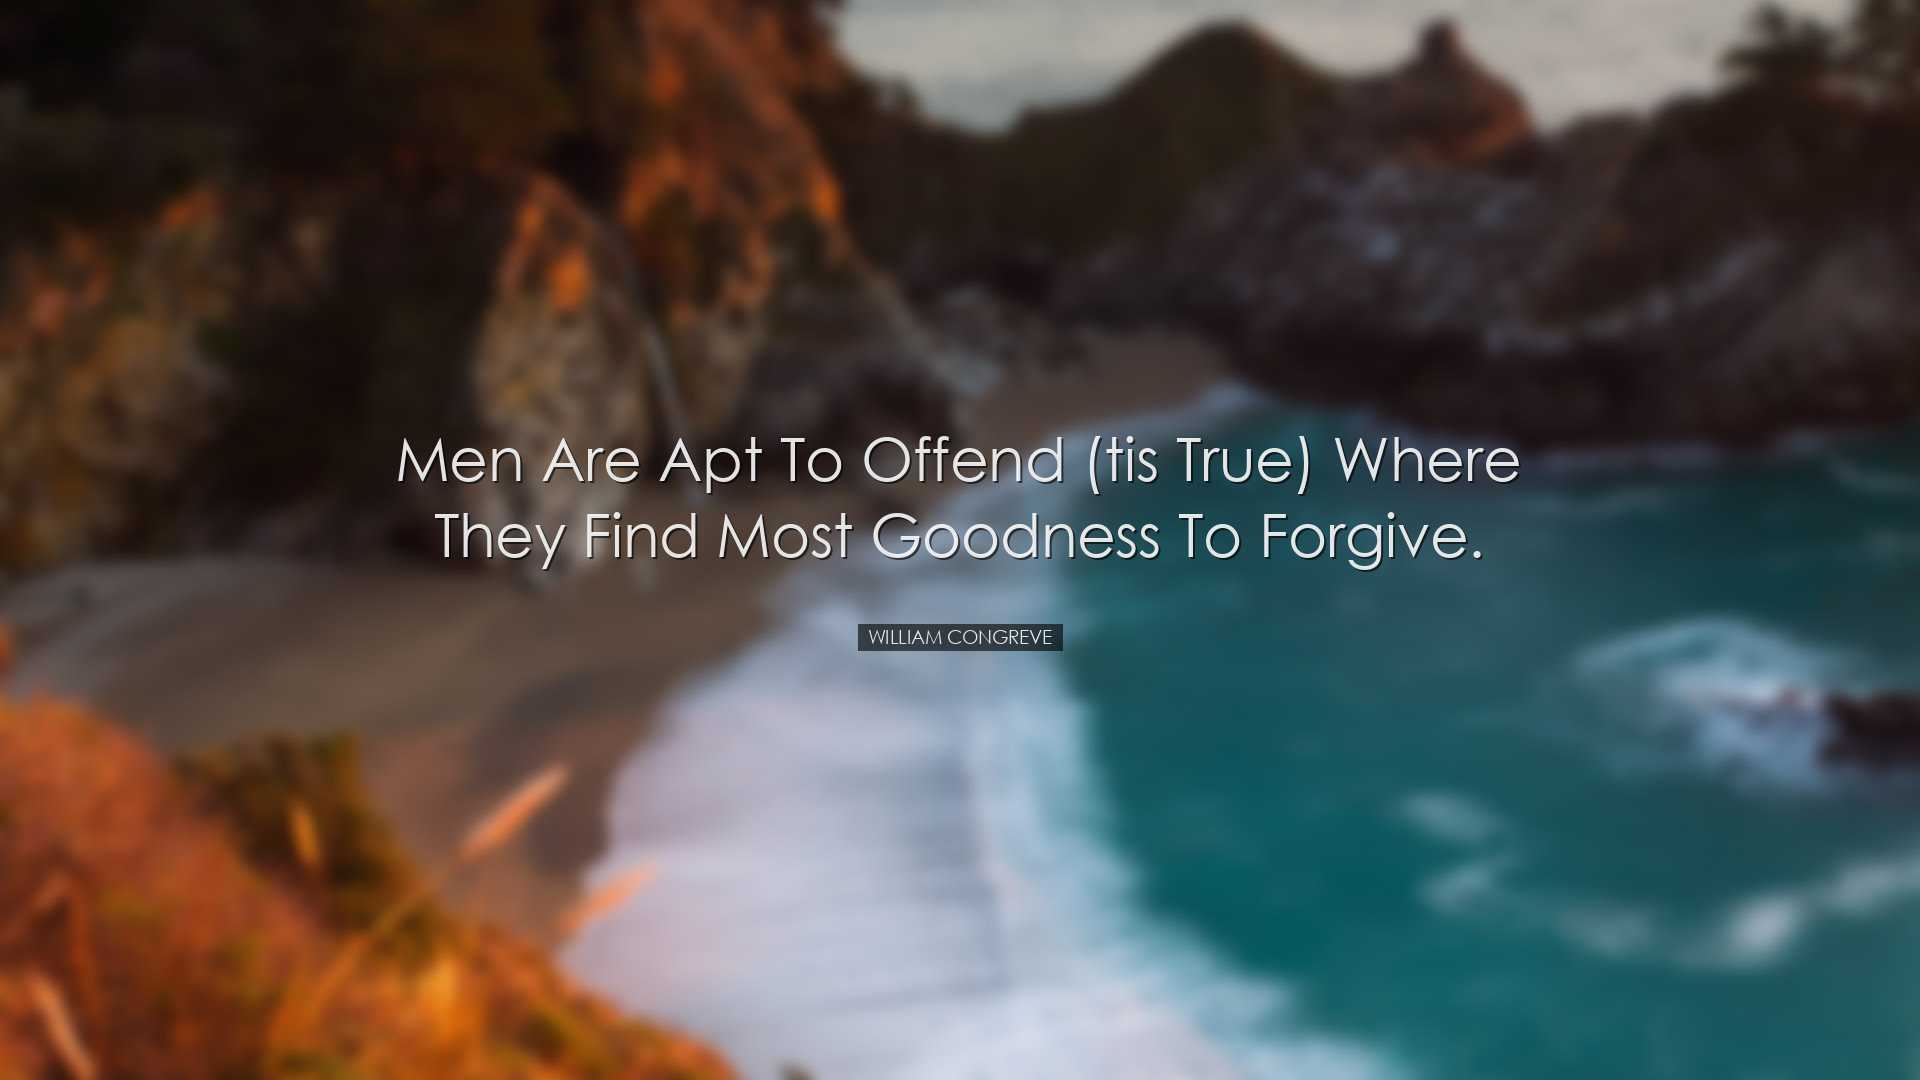 Men are apt to offend (tis true) where they find most goodness to